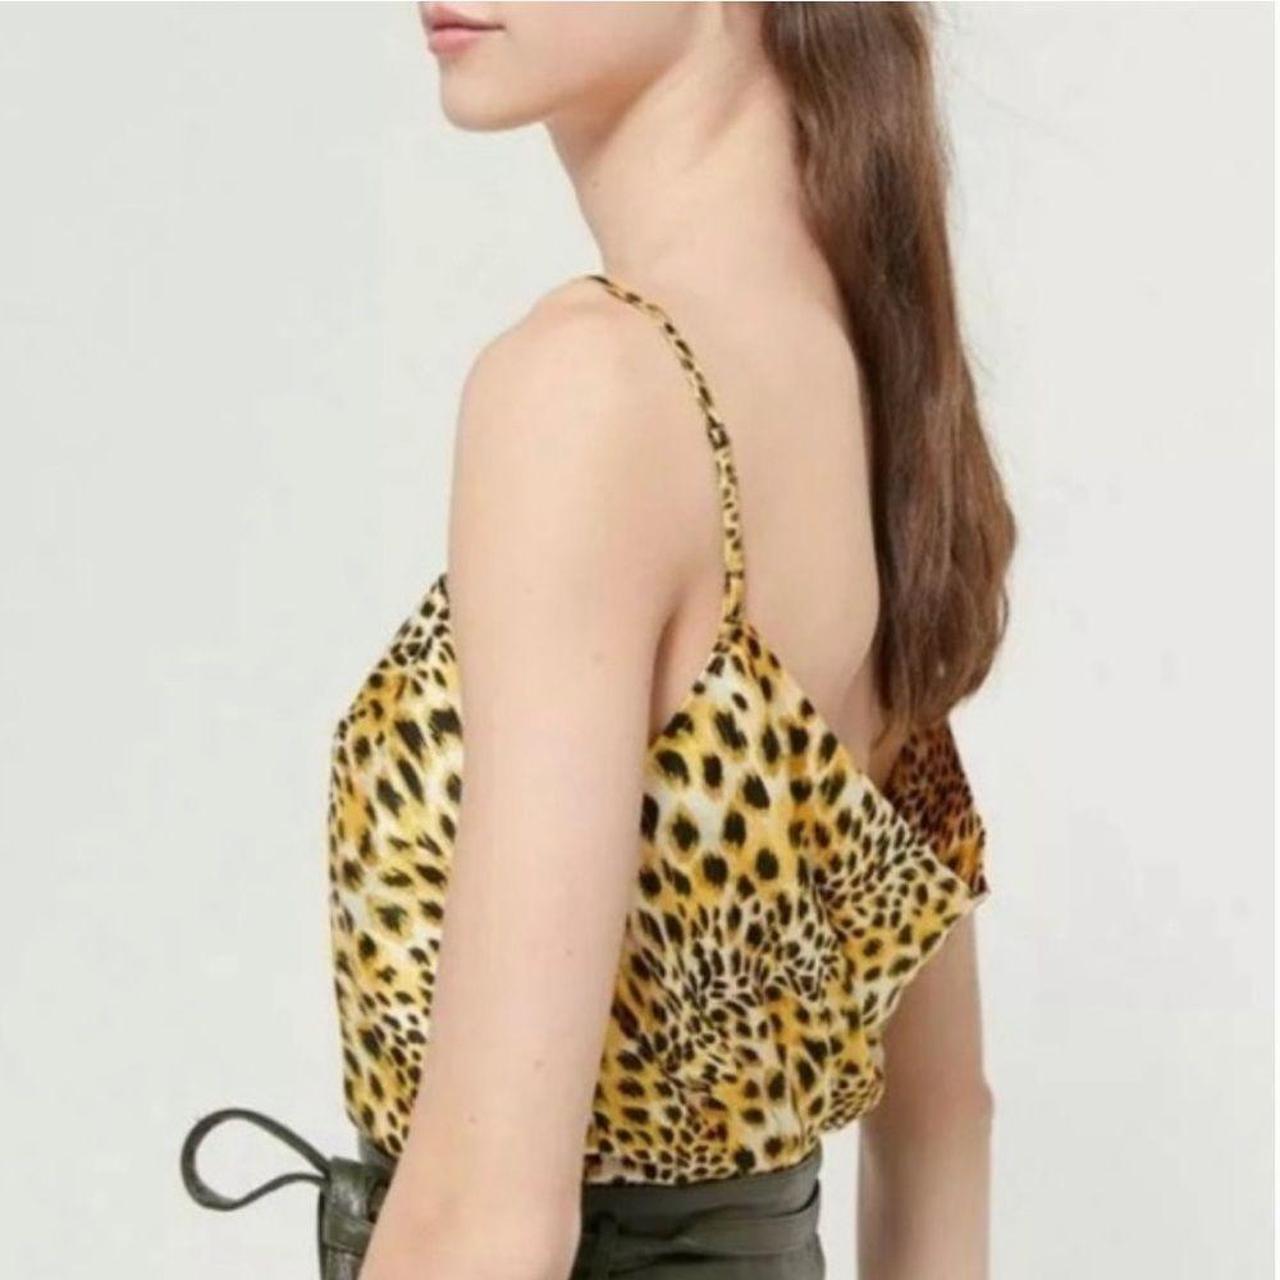 Urban Outfitters Women's Gold and Black Vests-tanks-camis (2)